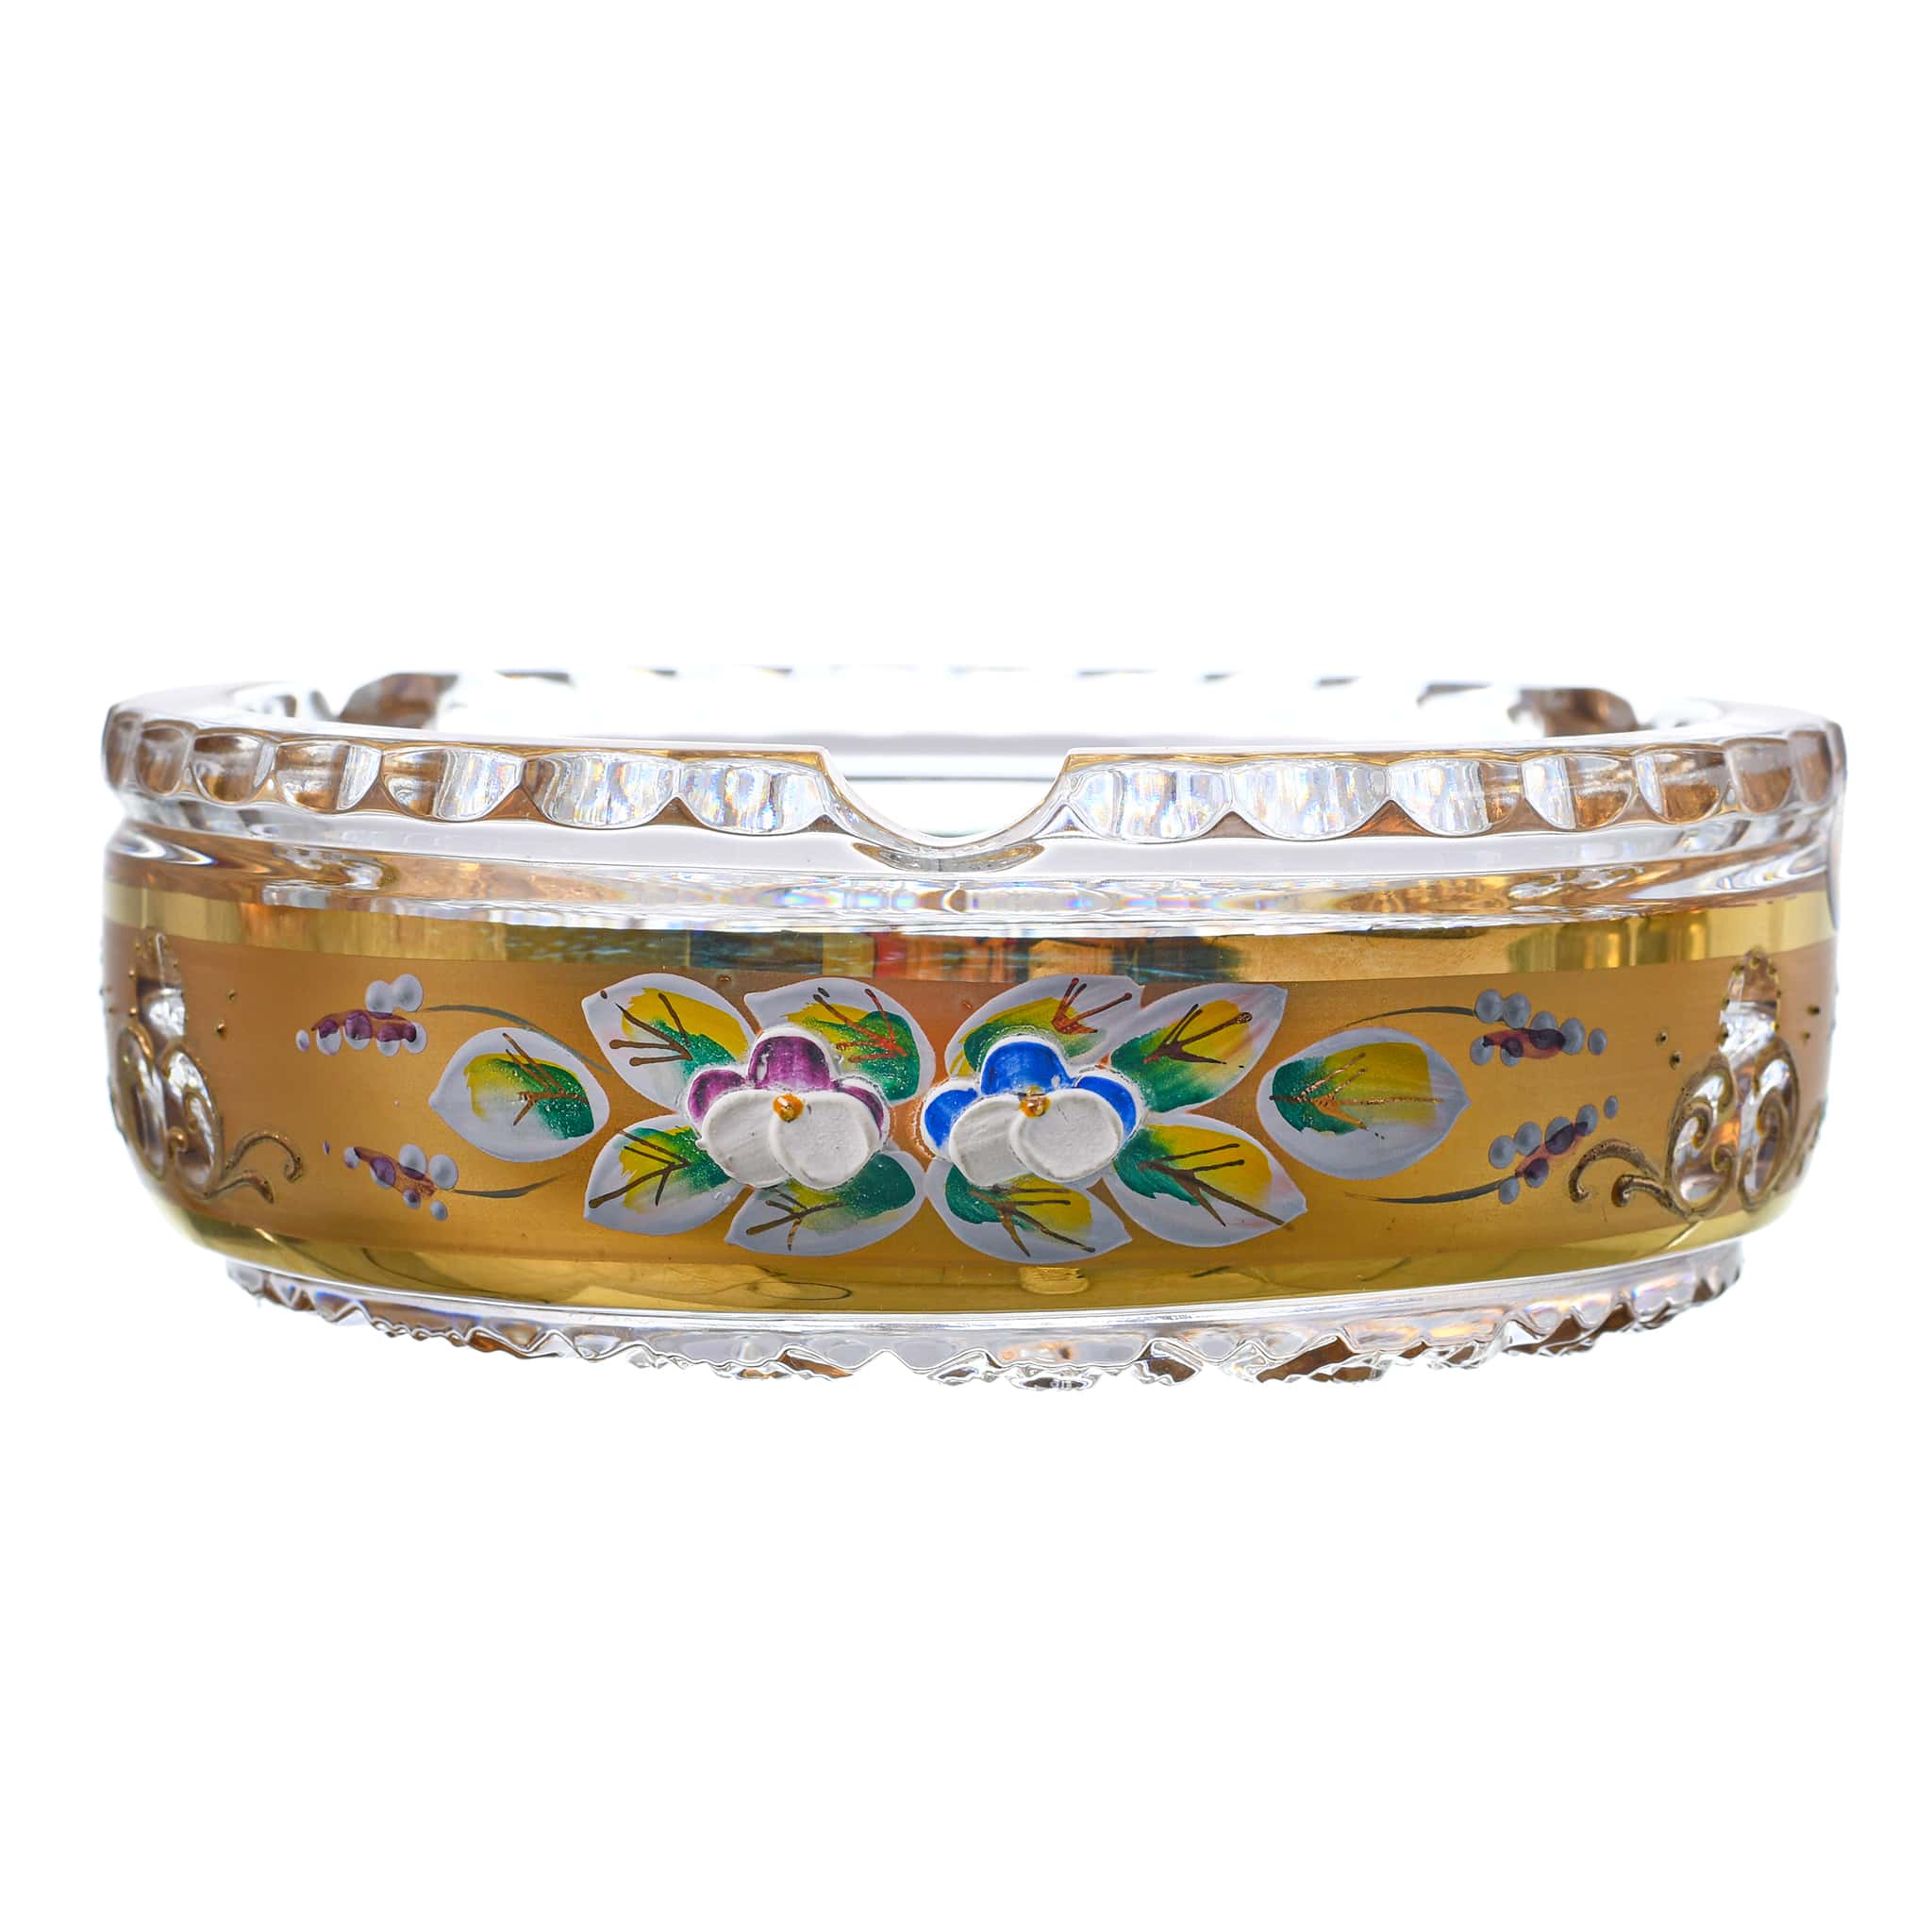 Bohemia Crystal - Crystal Ashtray - Gold With Floral Design - 4cm - 270009273